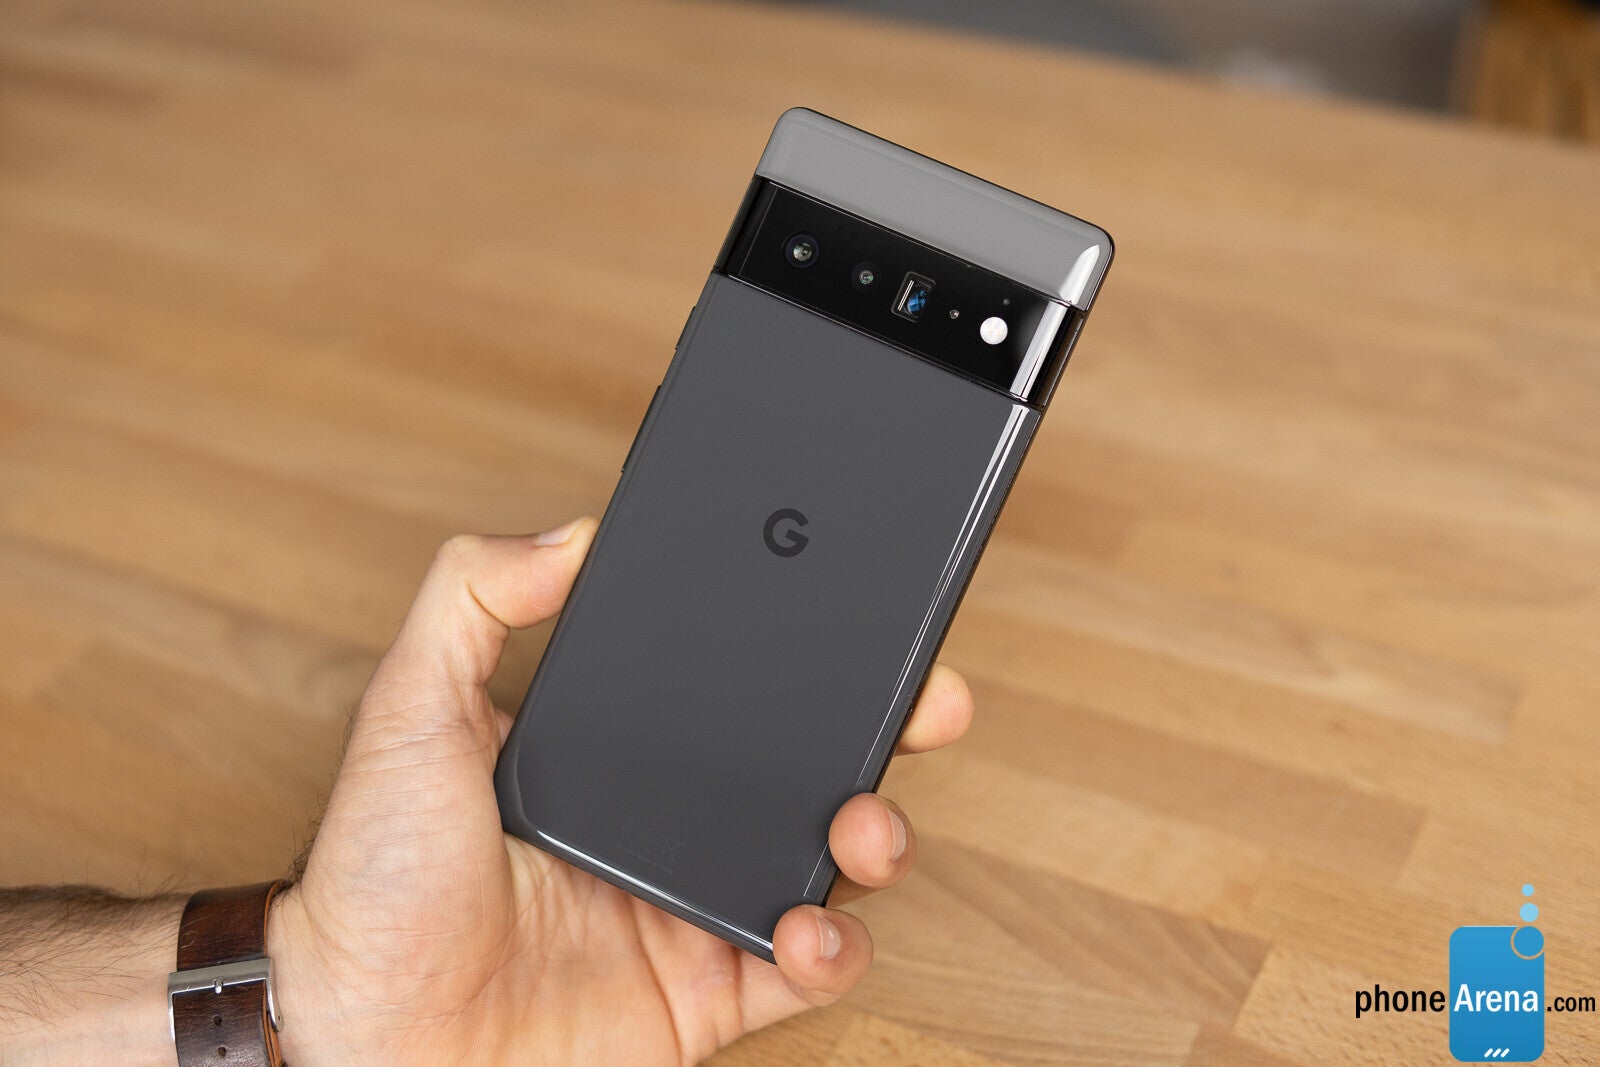 The Pixel 6 Pro - Google mocks LG for quitting the phone market, but what if it's next?